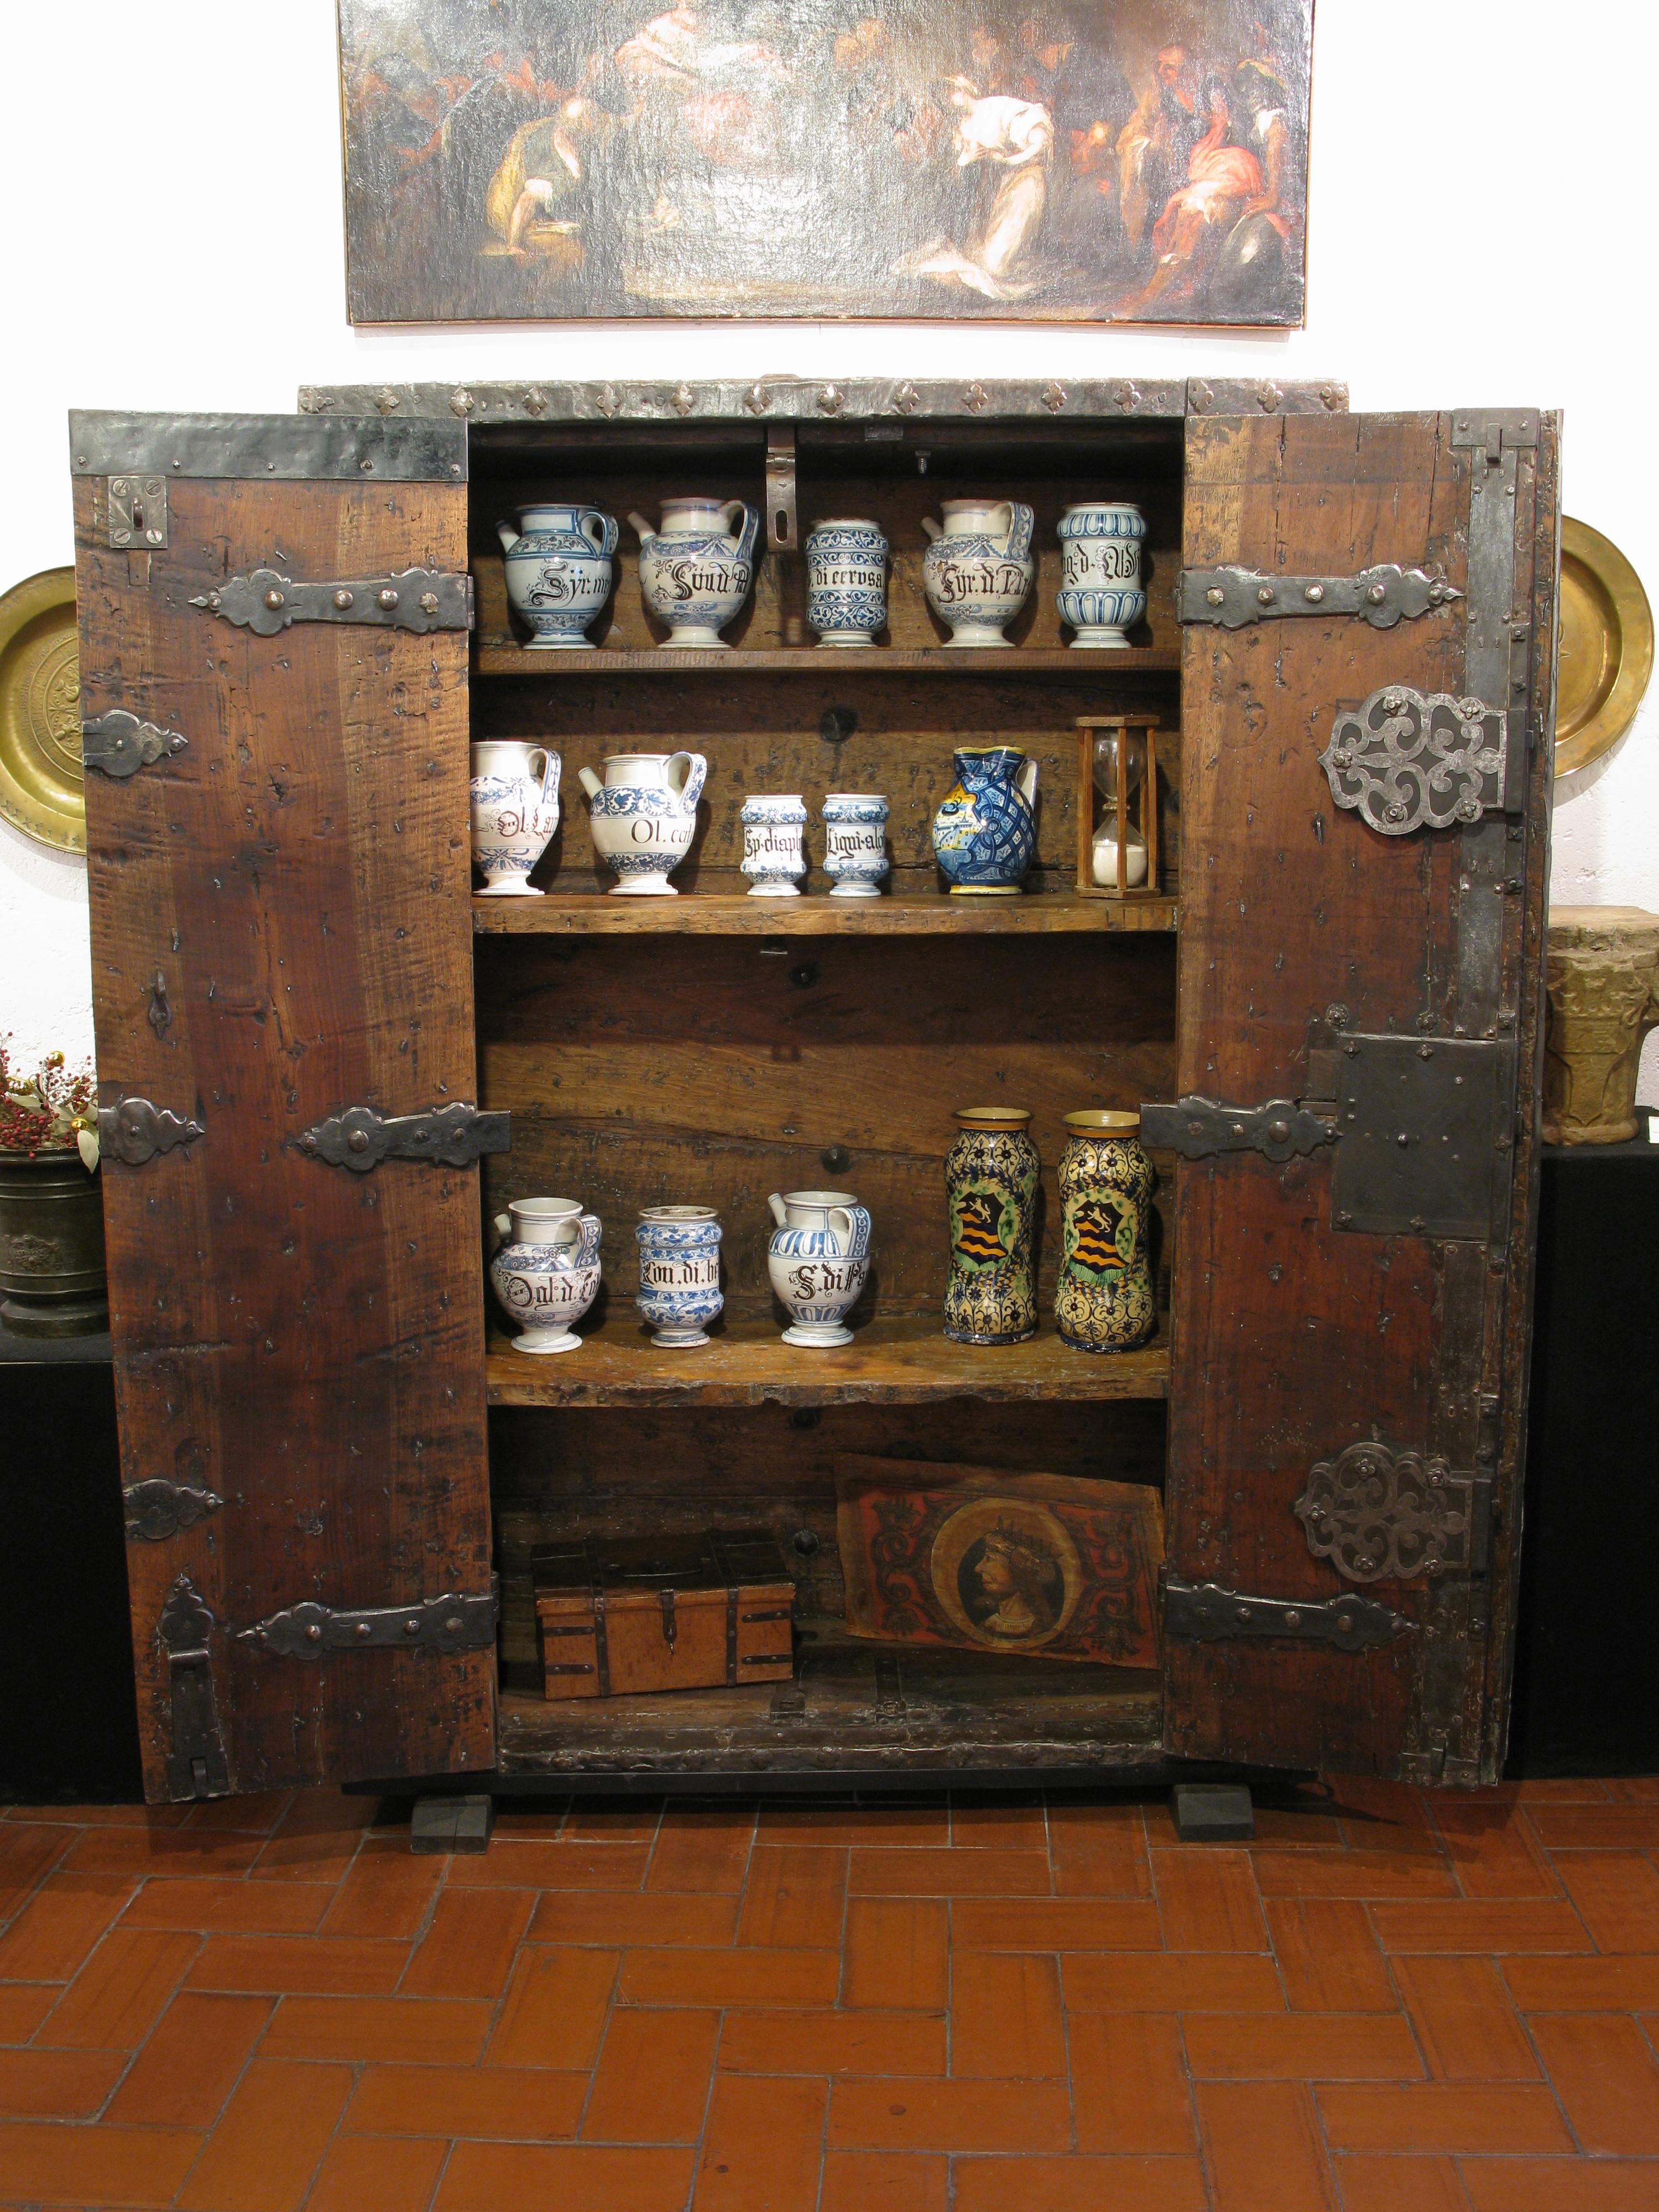 Antique Safe, Northern Italy, 17th Century For Sale 9